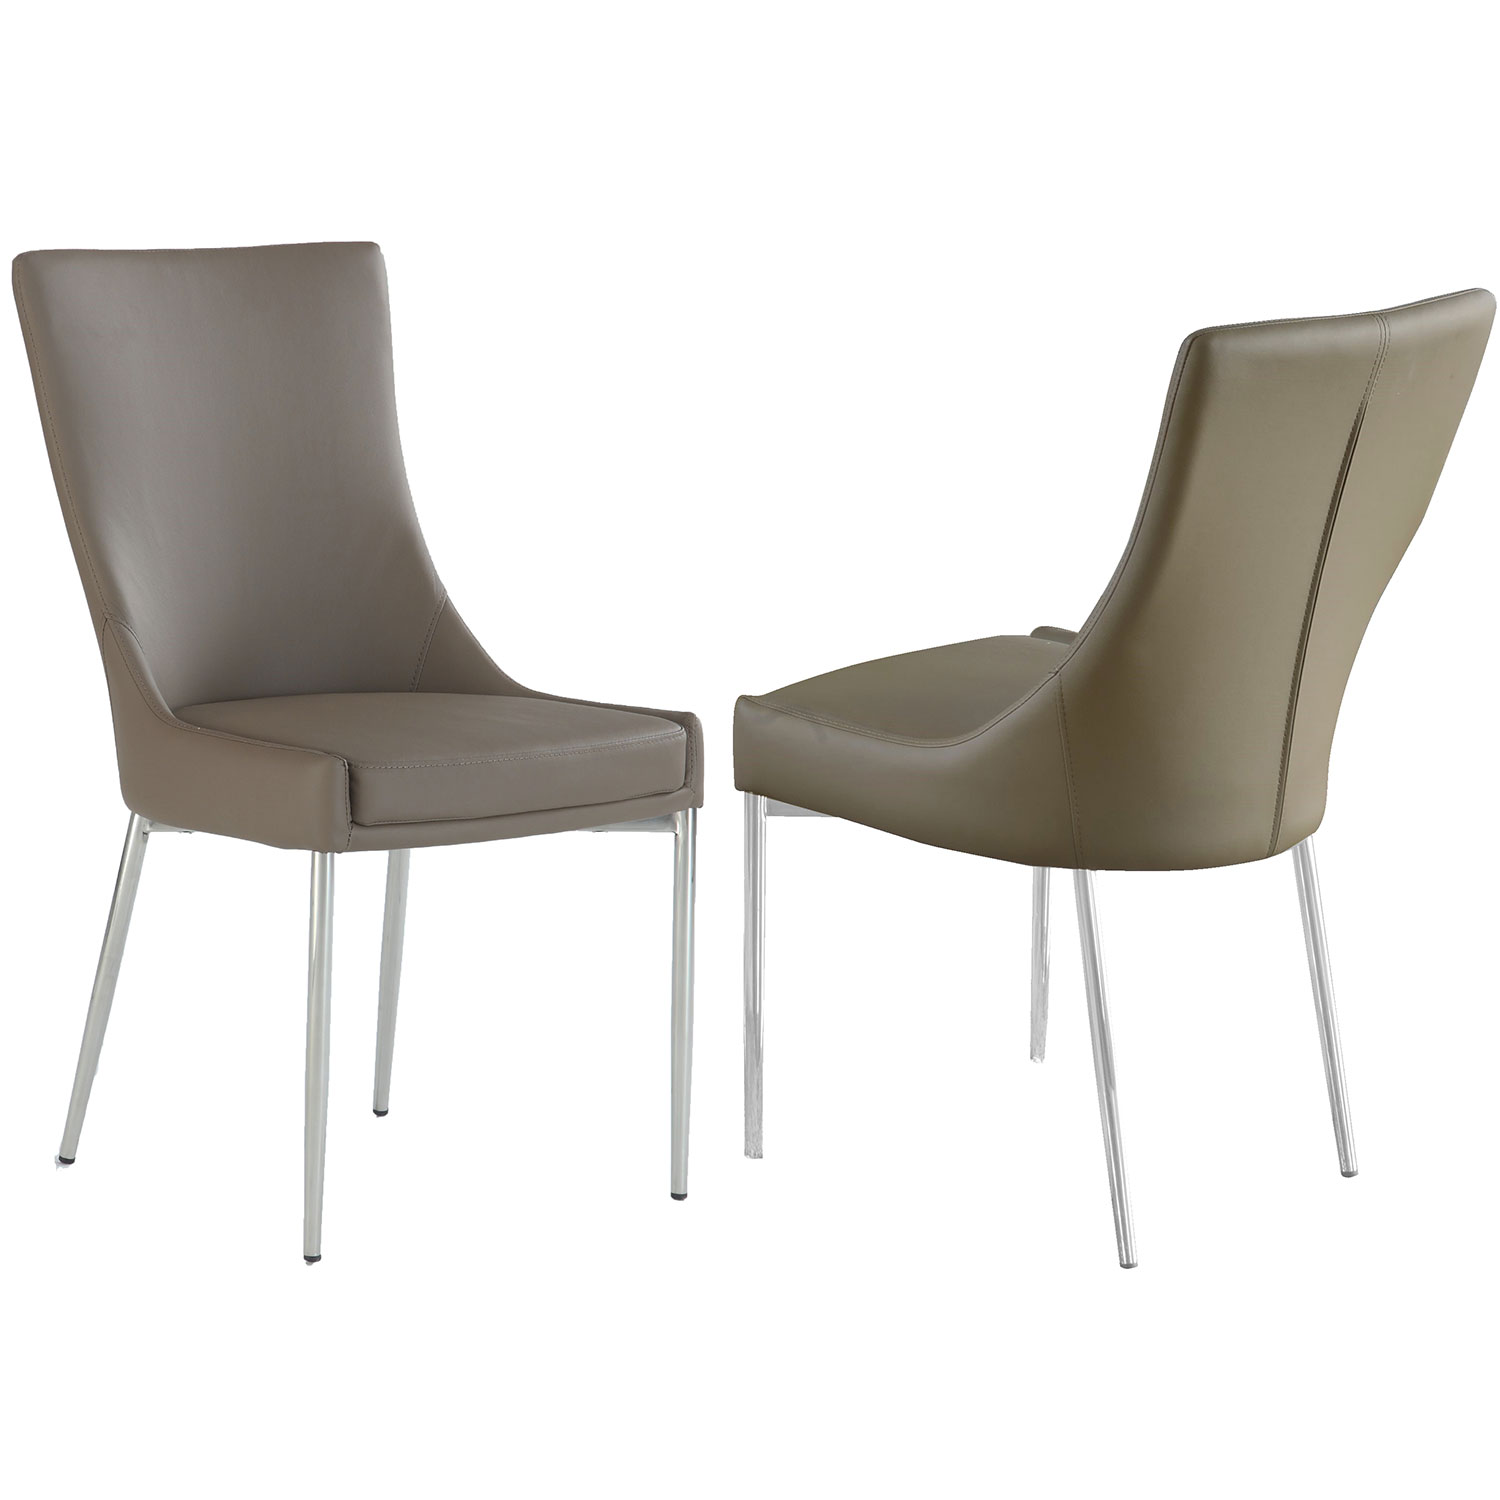 Patricia Designer Dining Chair in Light Brown Leatherette & Stainless (Set of 2)